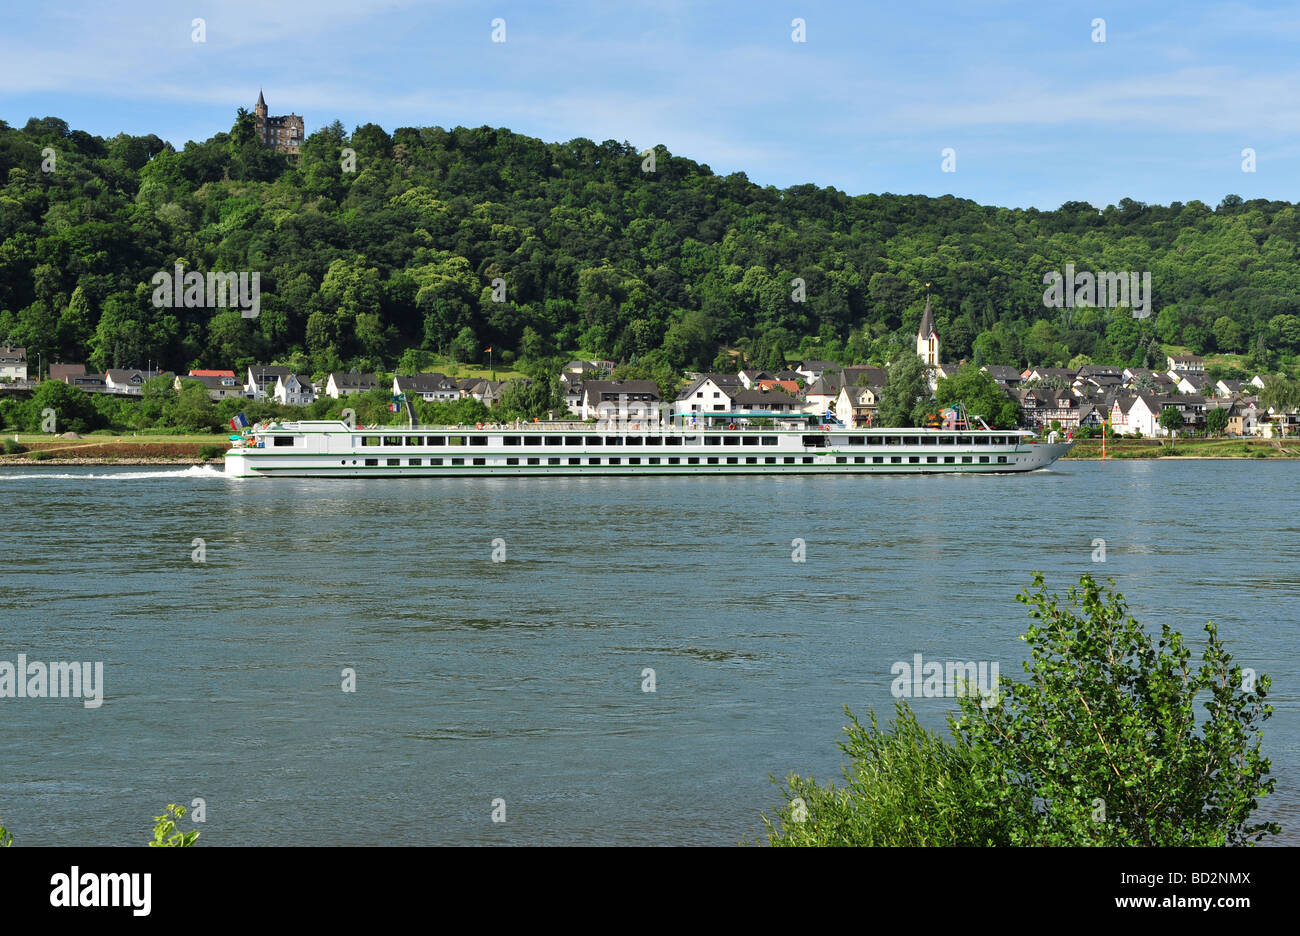 A Rhine Cruise ship travelling down the Rivel Rhine in Germany Image taken from the town of Boppard Stock Photo